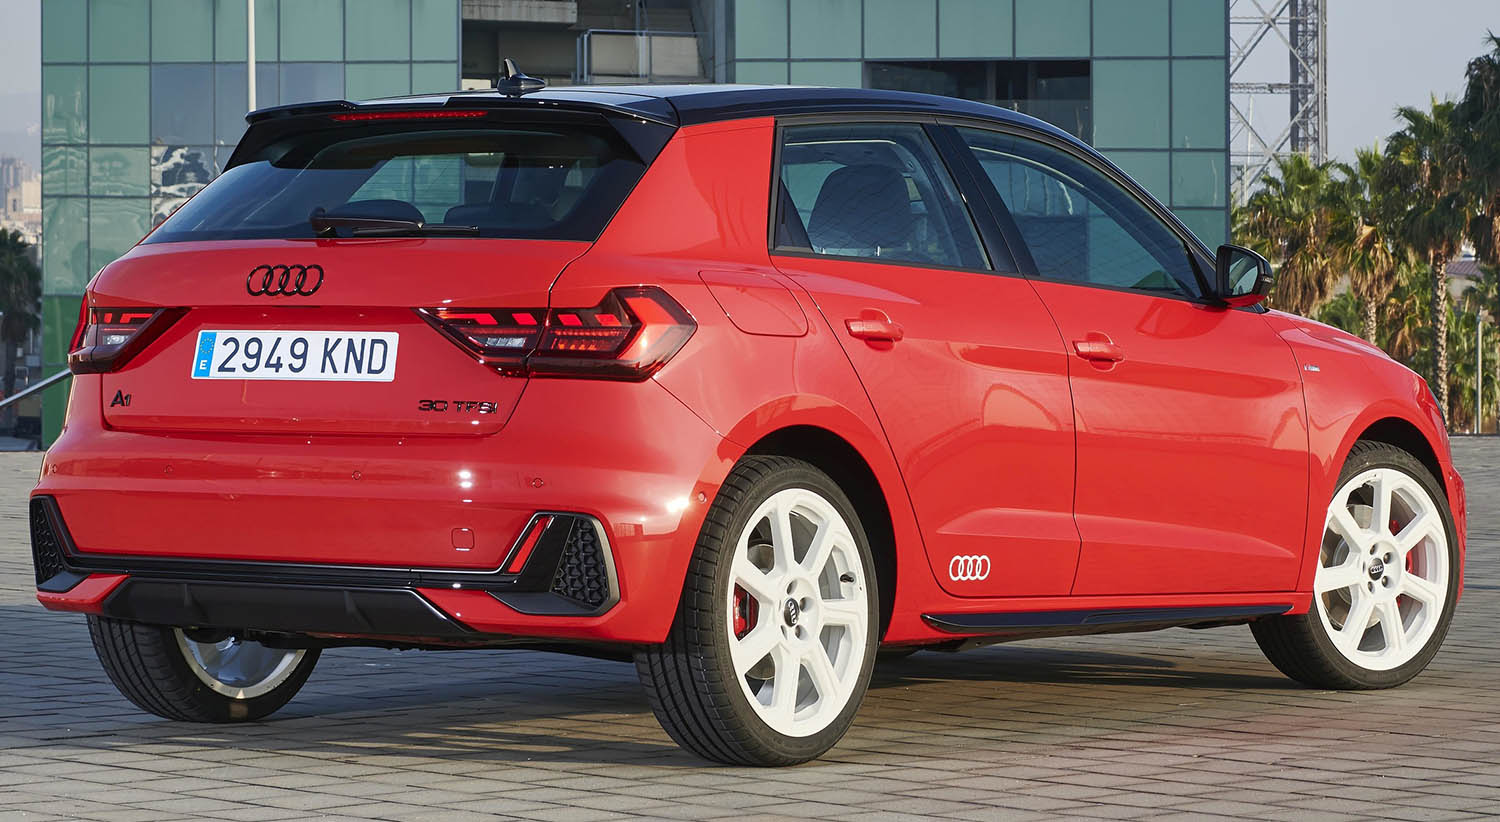 Audi A1 – Striking And Masculine With genes Of The Sporty Ur-Quattro